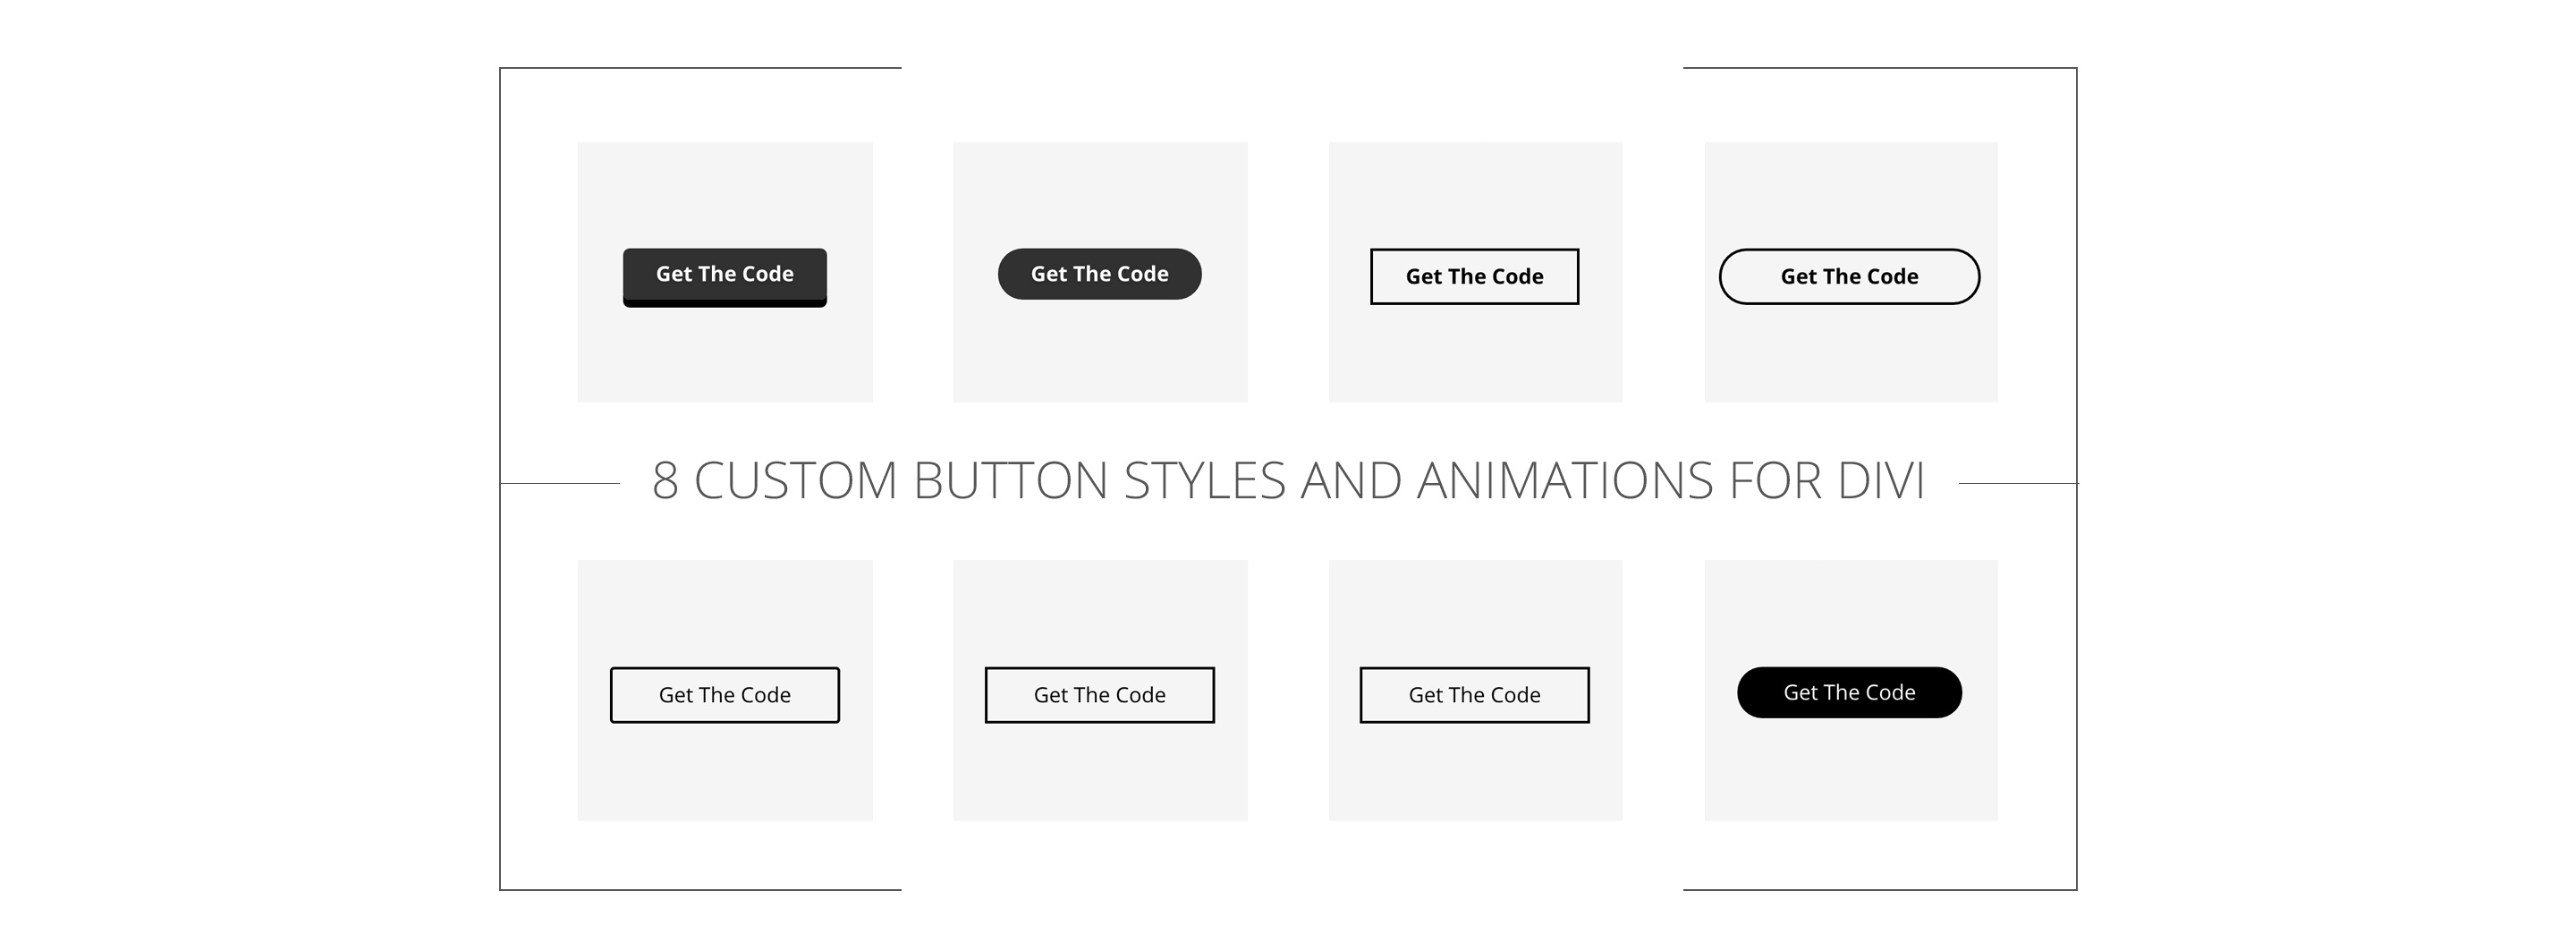 divi-buttons-share-img